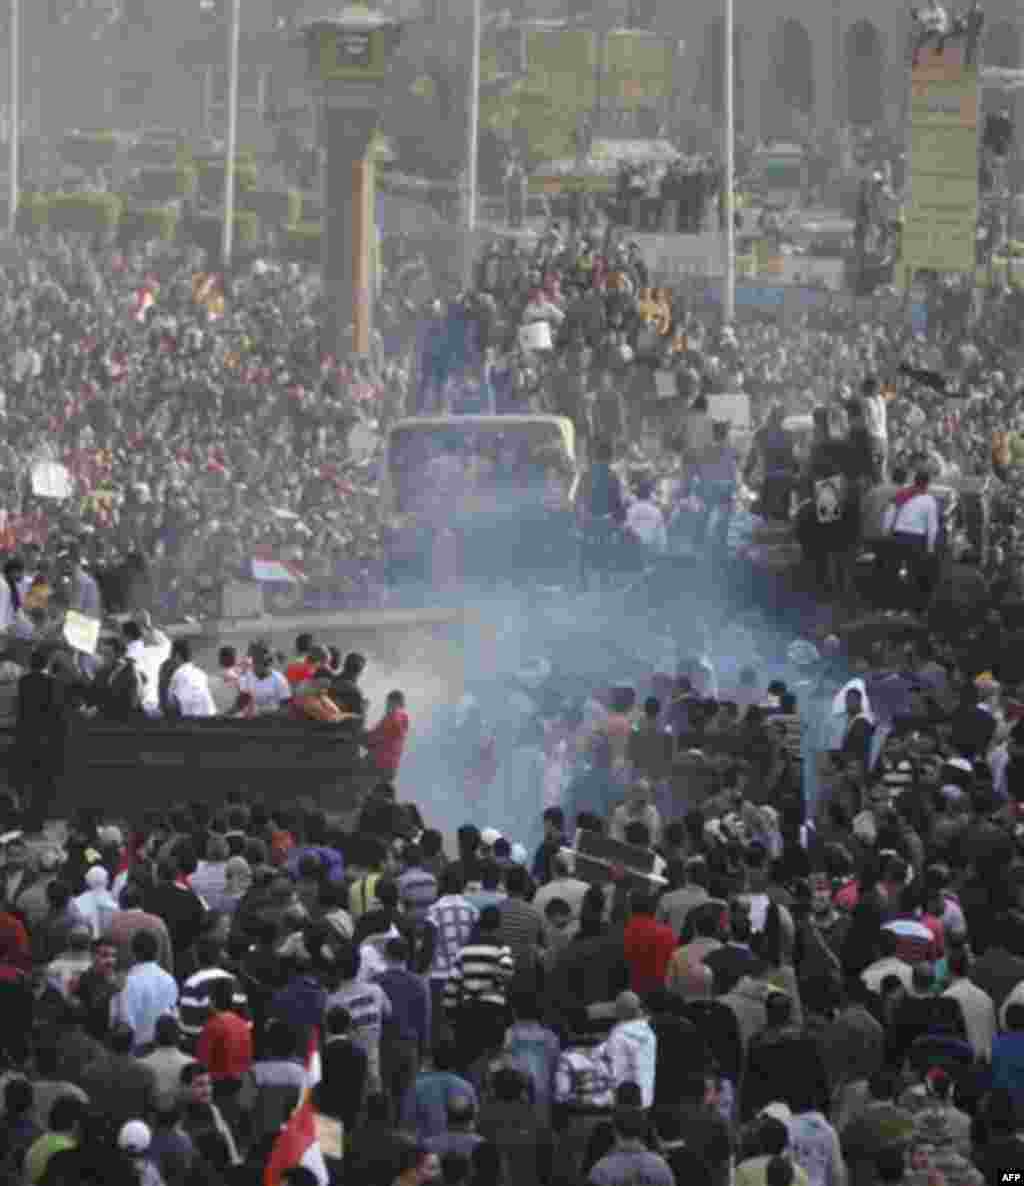 Supporters of President Hosni Mubarak, foreground, fight with anti-Mubarak protesters in Cairo, Egypt, Wednesday, Feb.2, 2011. Several thousand supporters of President Hosni Mubarak, including some riding horses and camels and wielding whips, clashed with